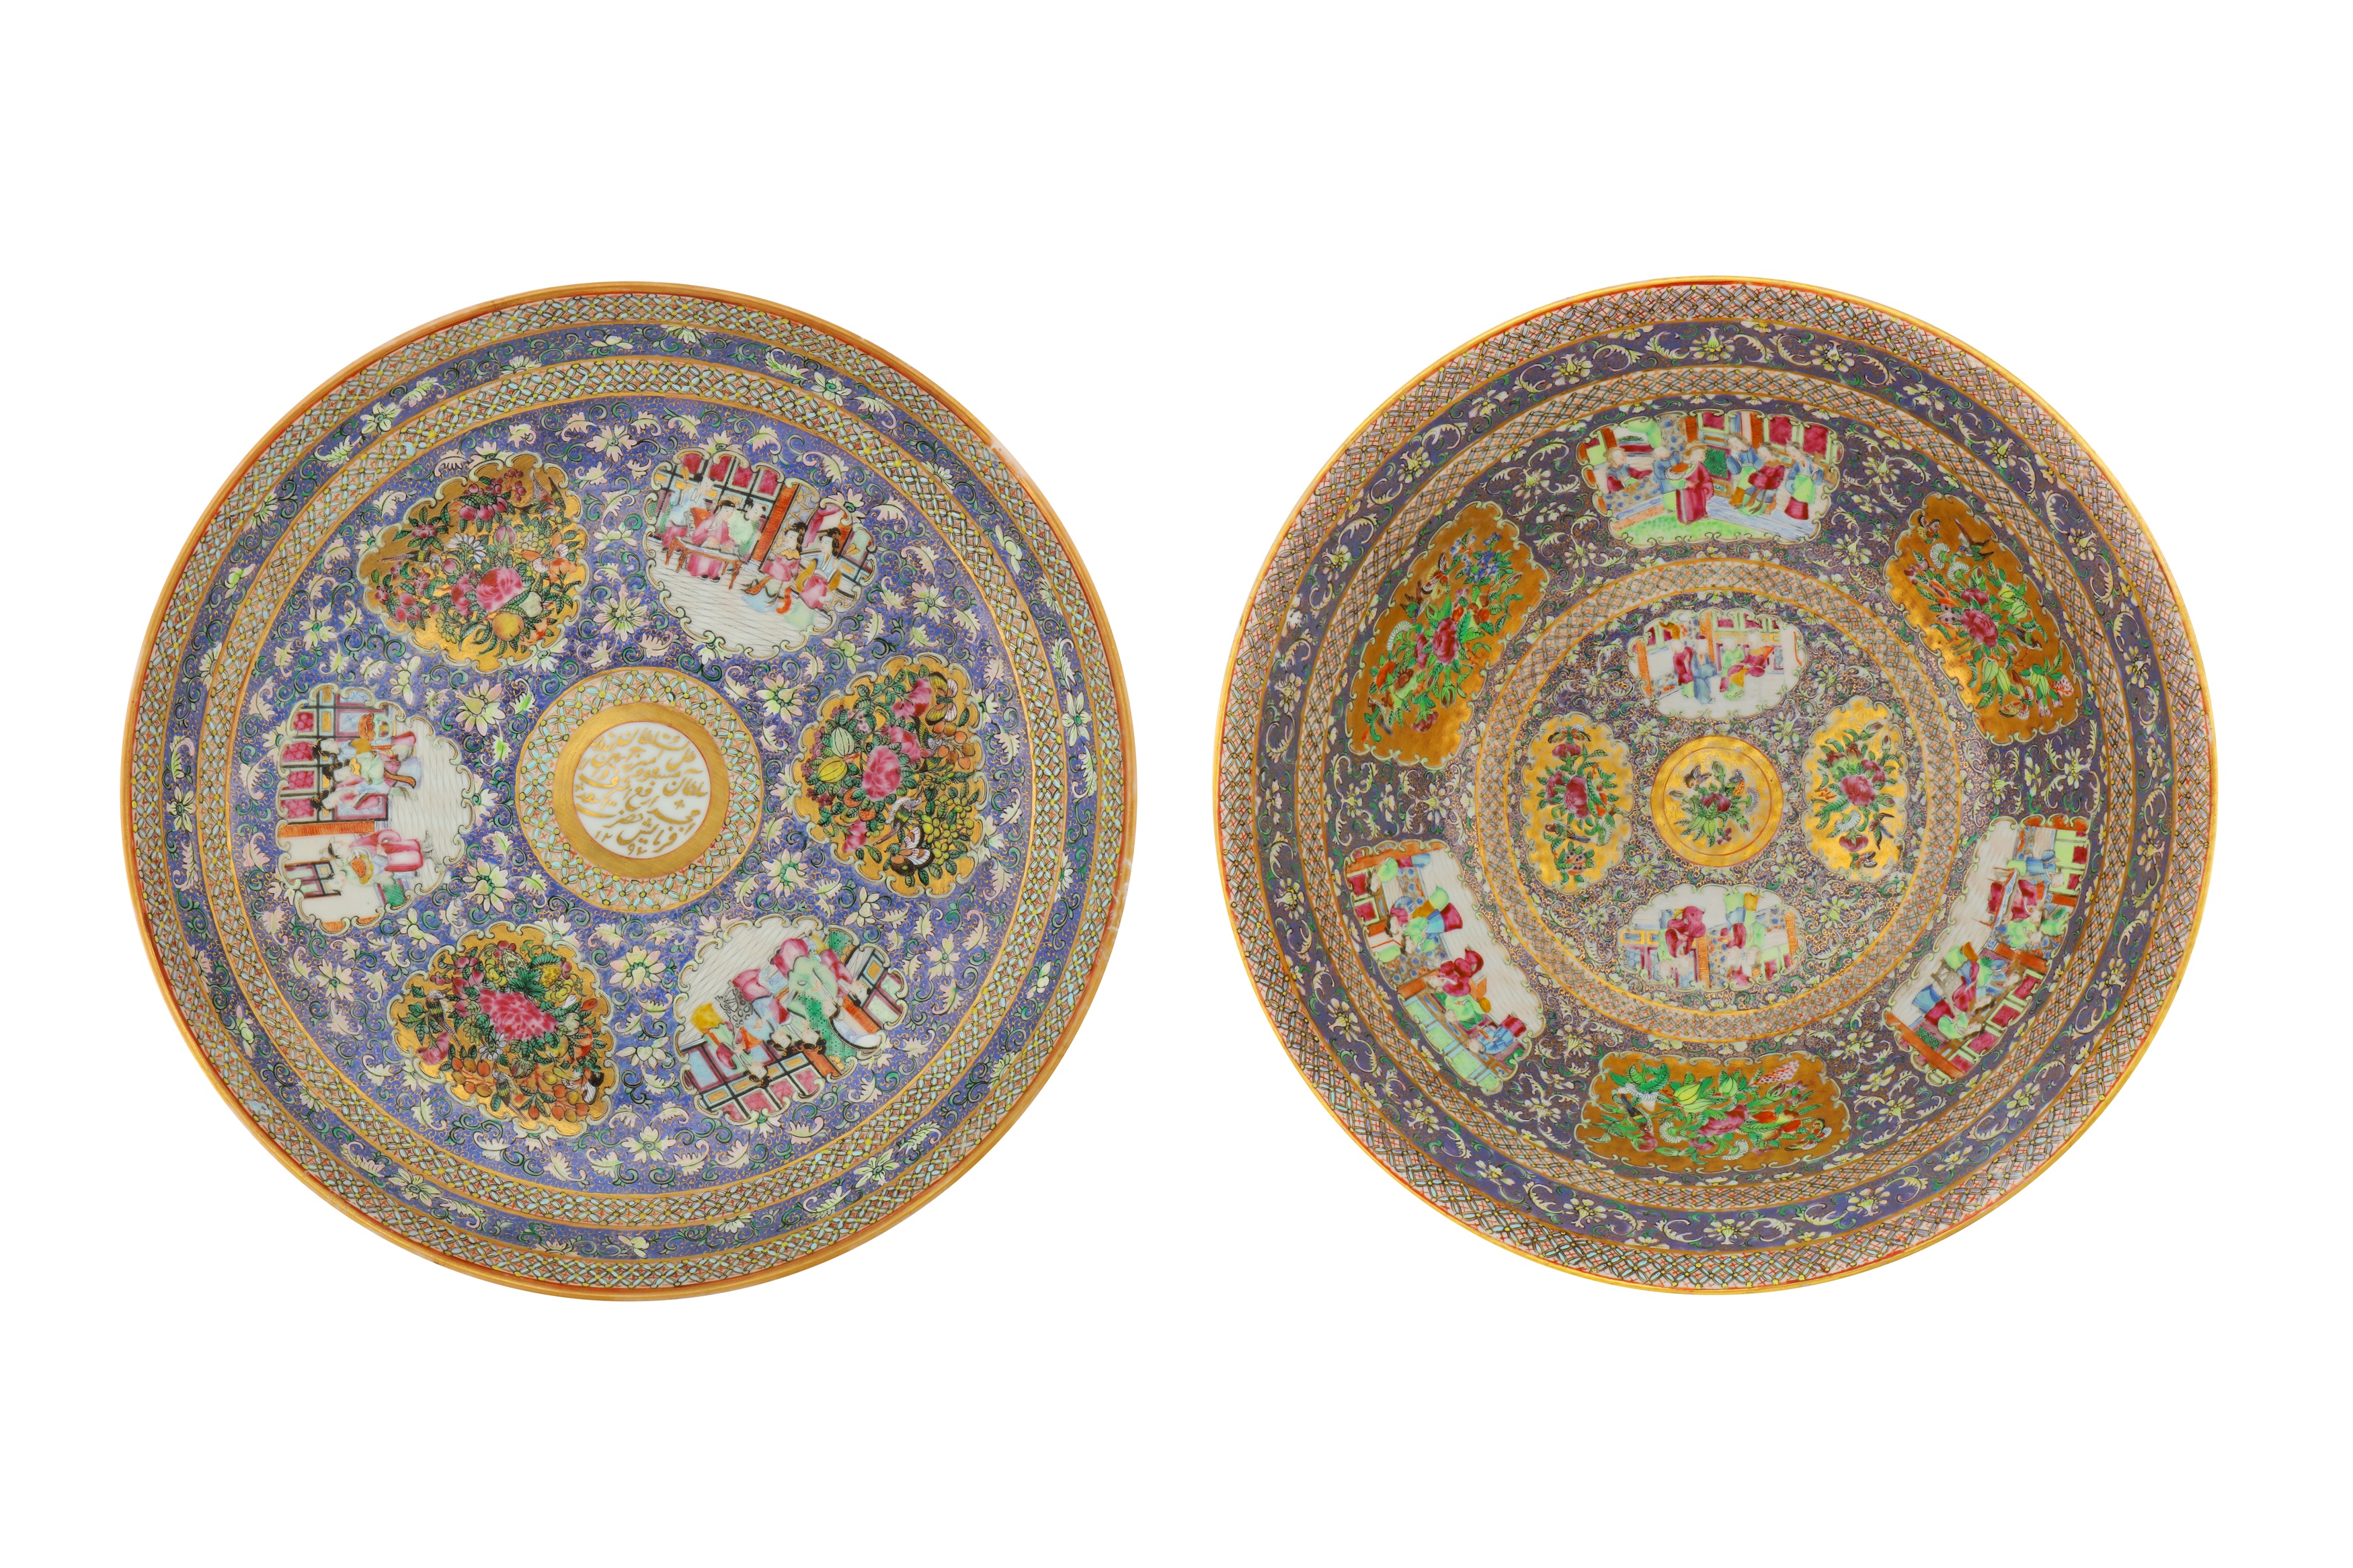 A LARGE BOWL AND DISH FROM THE ZILL AL-SULTAN CANTON PORCELAIN SERVICE